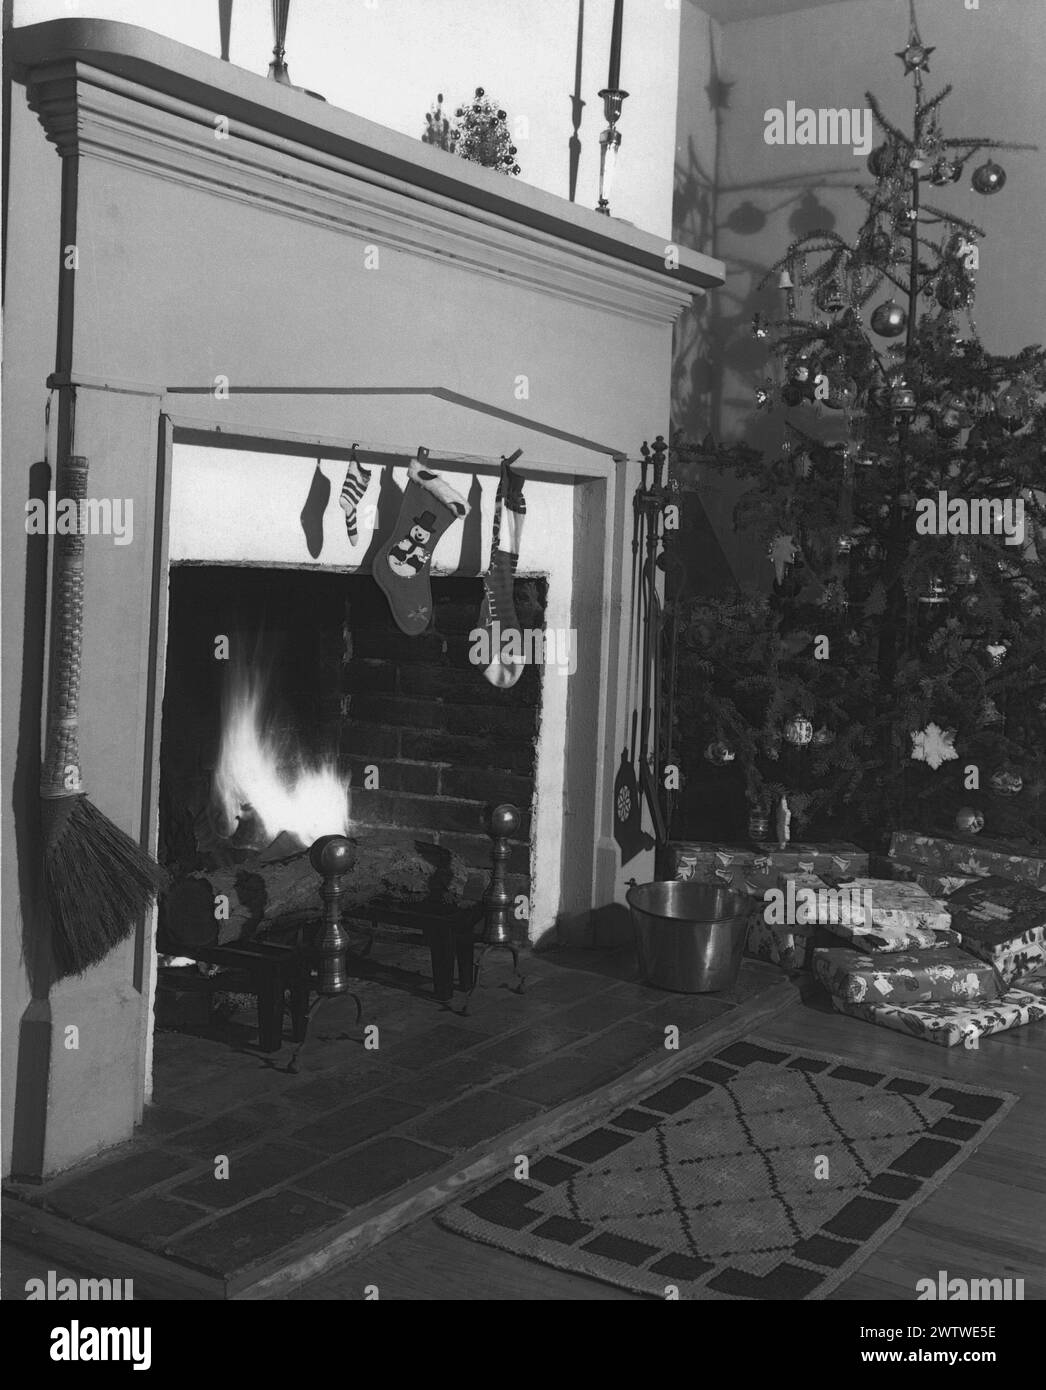 blazing fire in the grate of a decorated fireplace next to a Christmas tree which has presents underneath Stock Photo